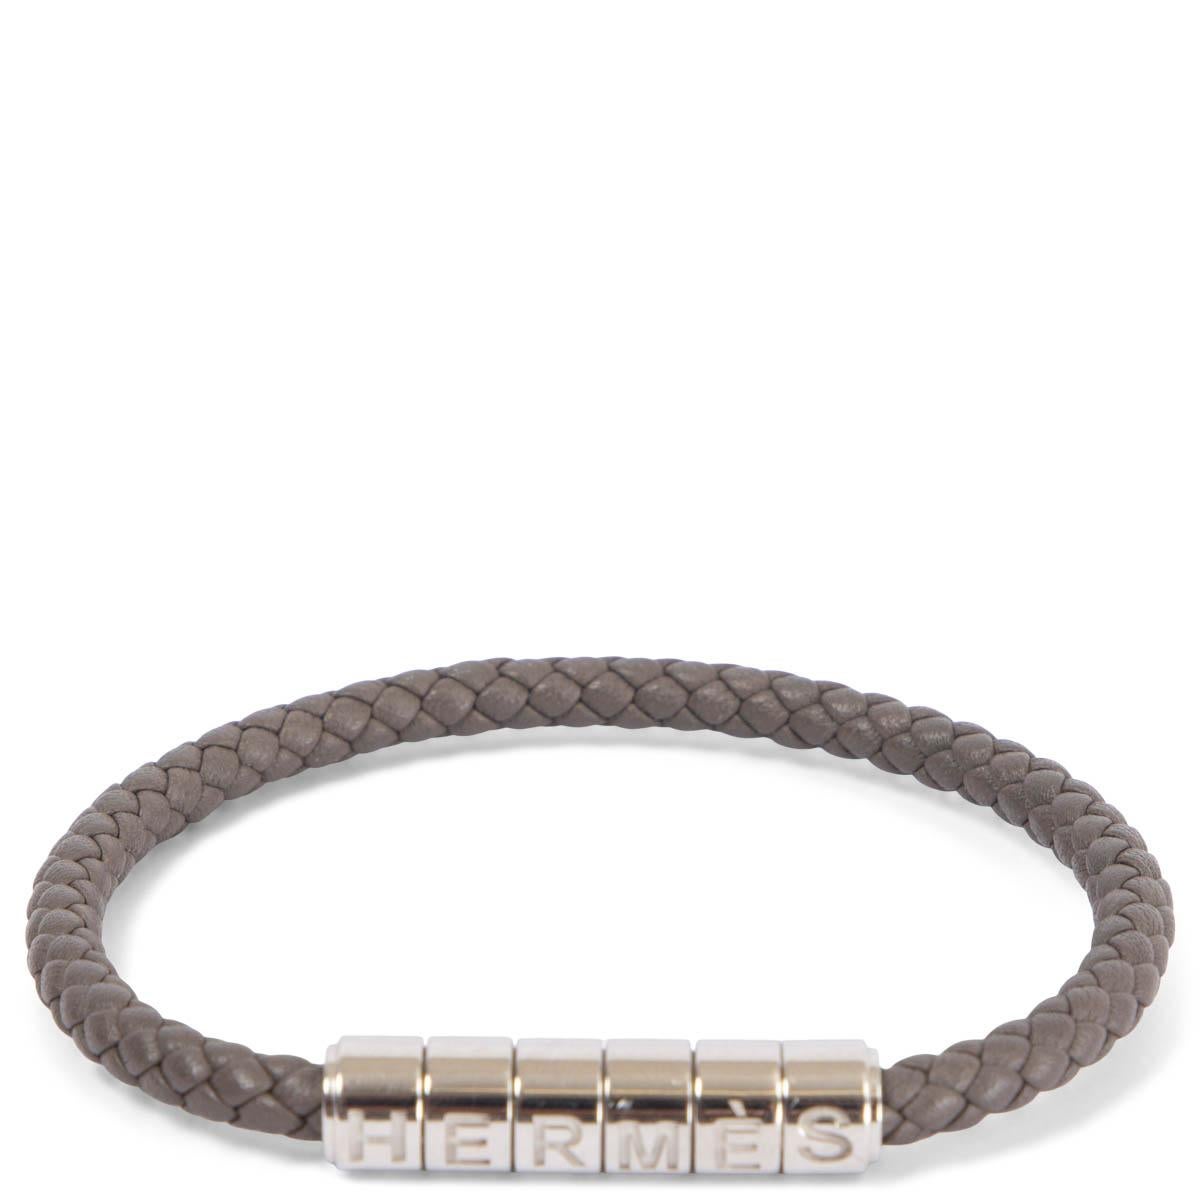 100% authentic Hermès Goliath Code bracelet in Etain grey braided Swift leather with palladium hardware. The bracelet's clasp plays on the five letters of Hermes like a secret code. Has been worn and is in excellent condition. Comes with